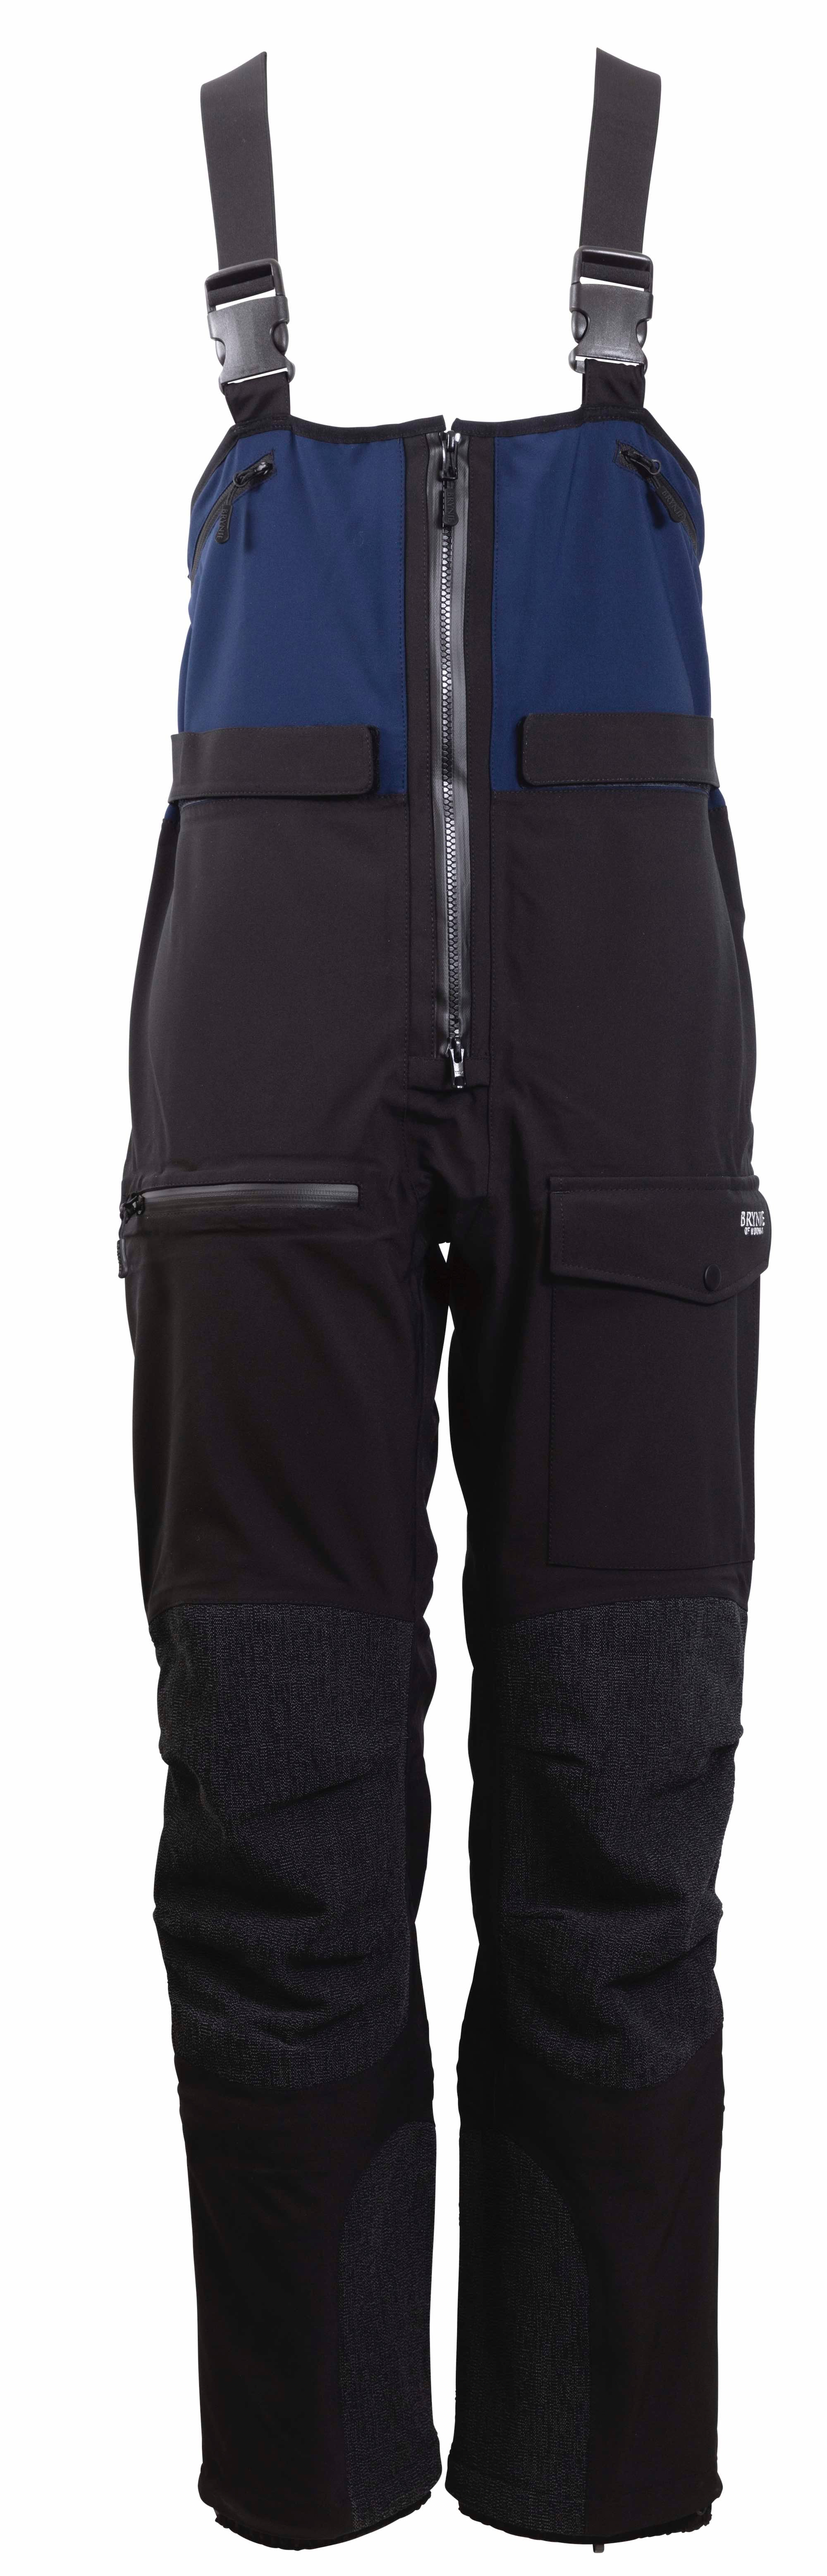 Brynje Expedition Pants – Nordiclife